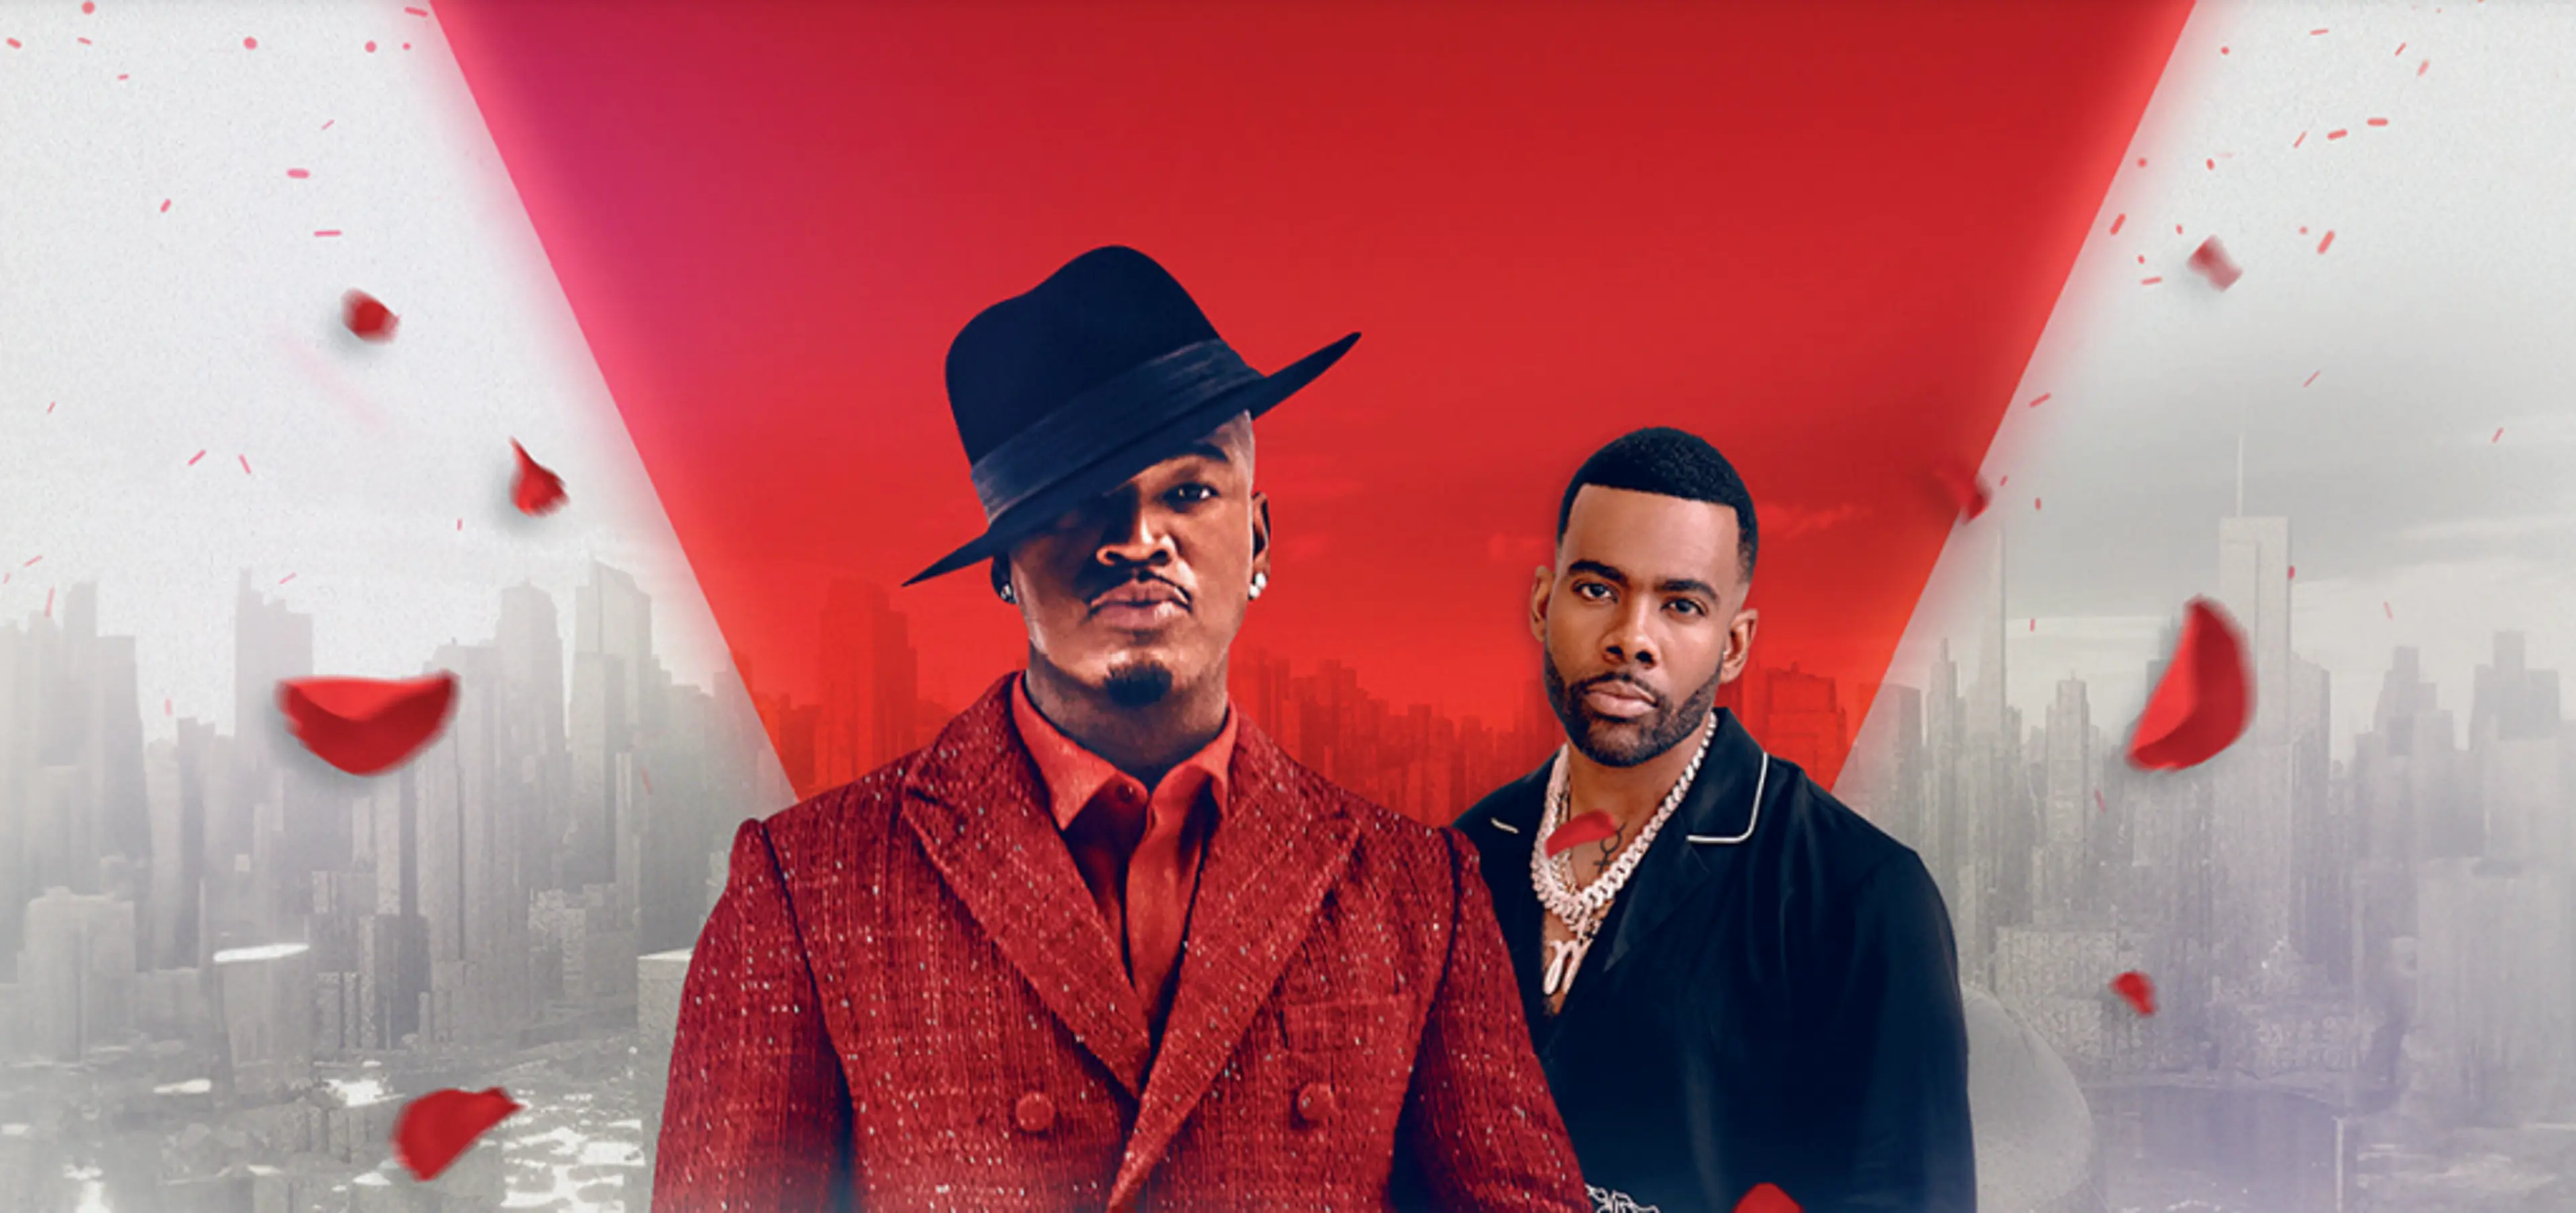 NE-YO: Champagne & Roses Tour with special guest Mario